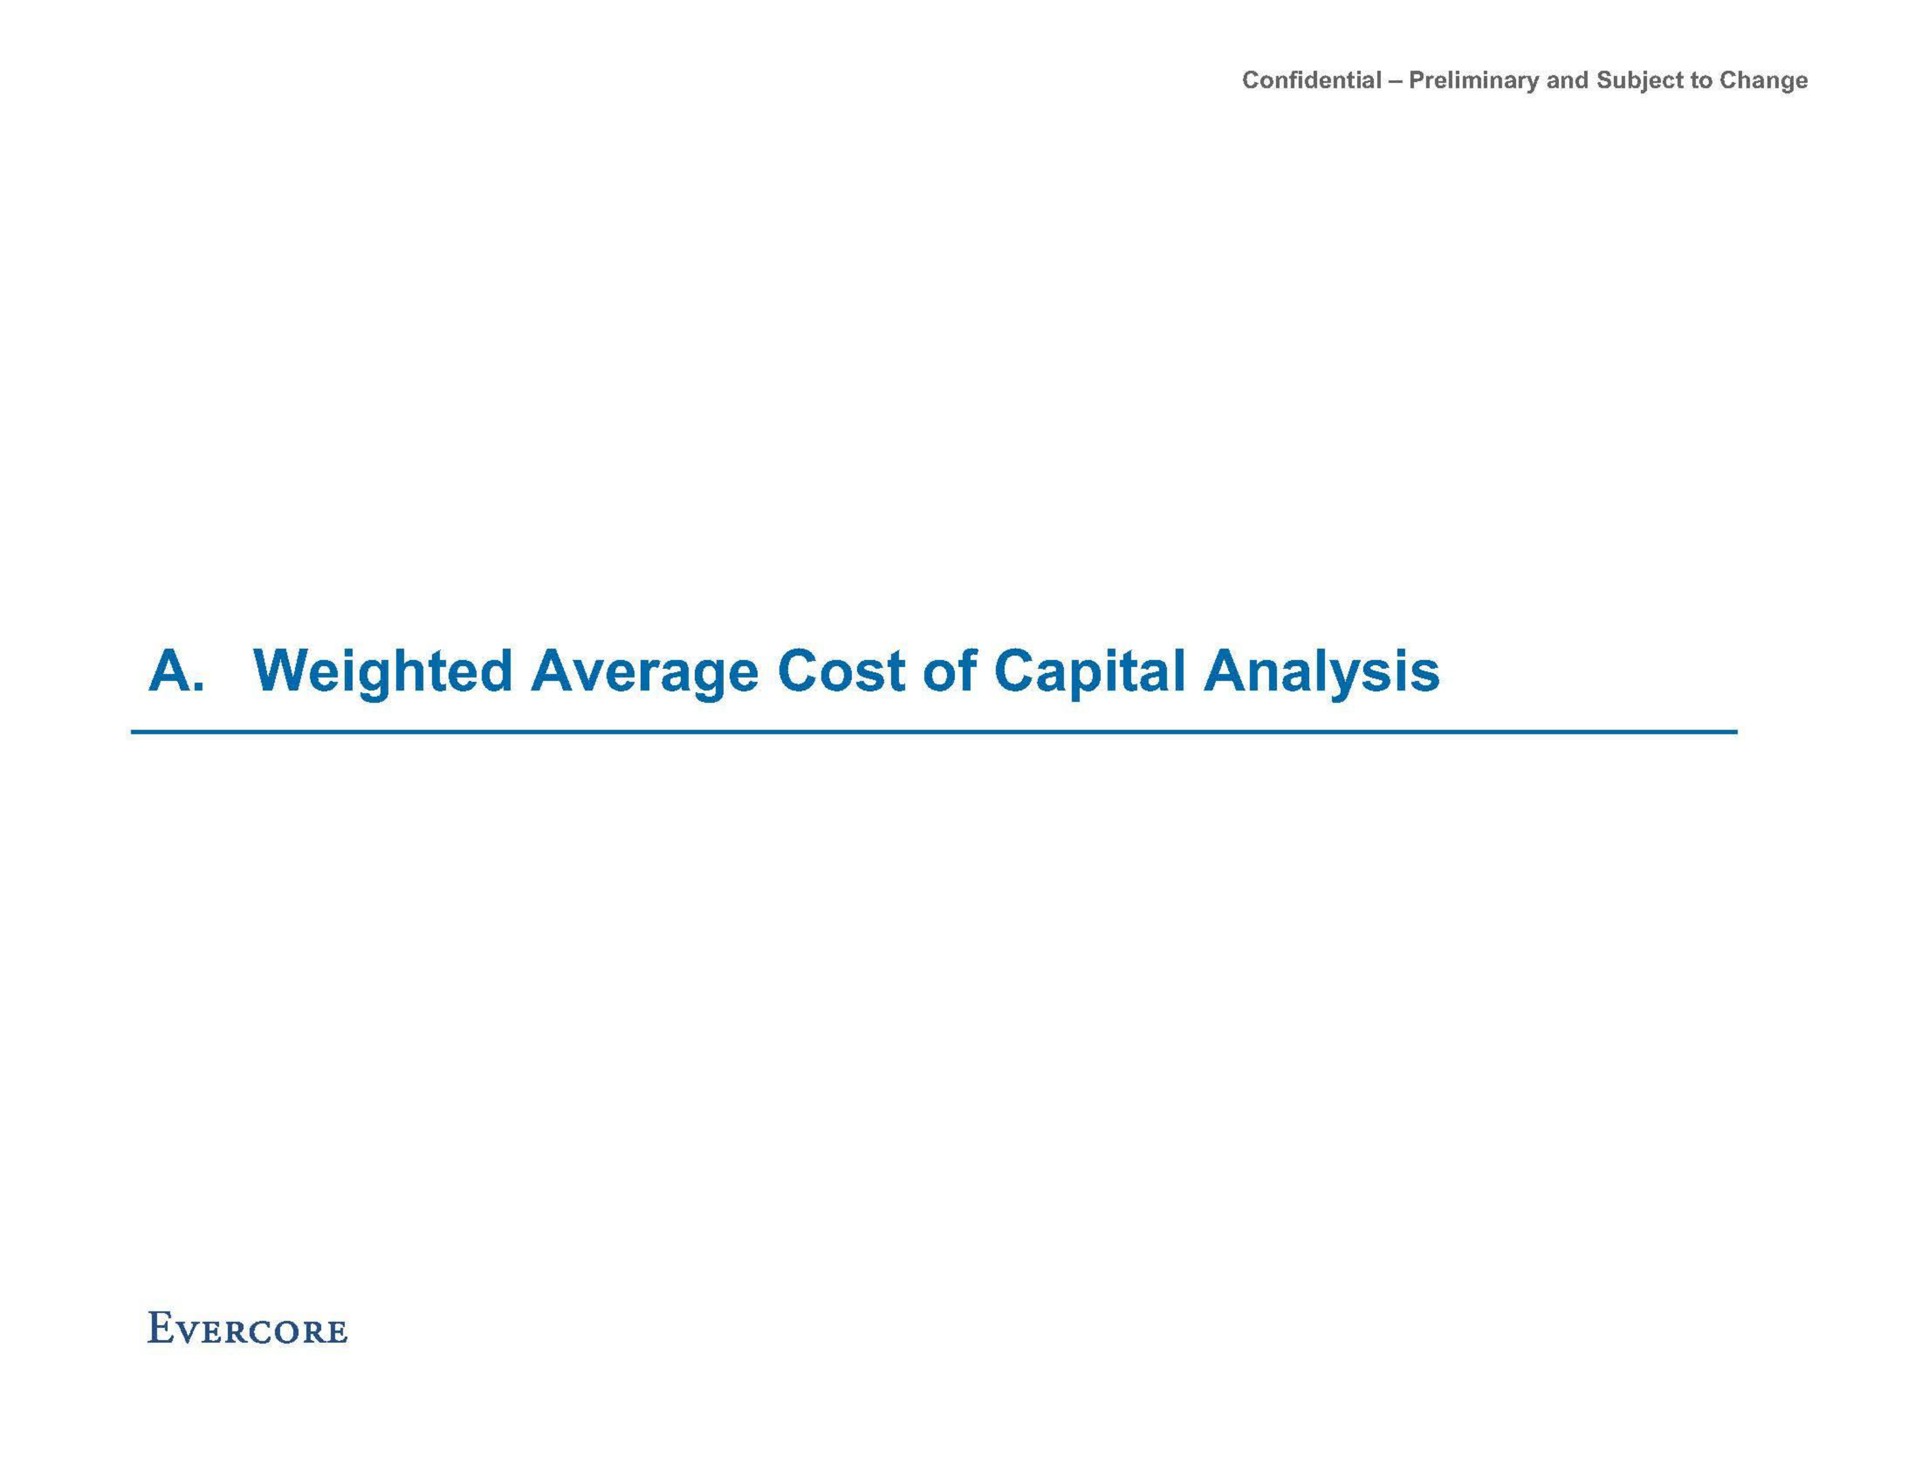 a weighted average cost of capital analysis | Evercore